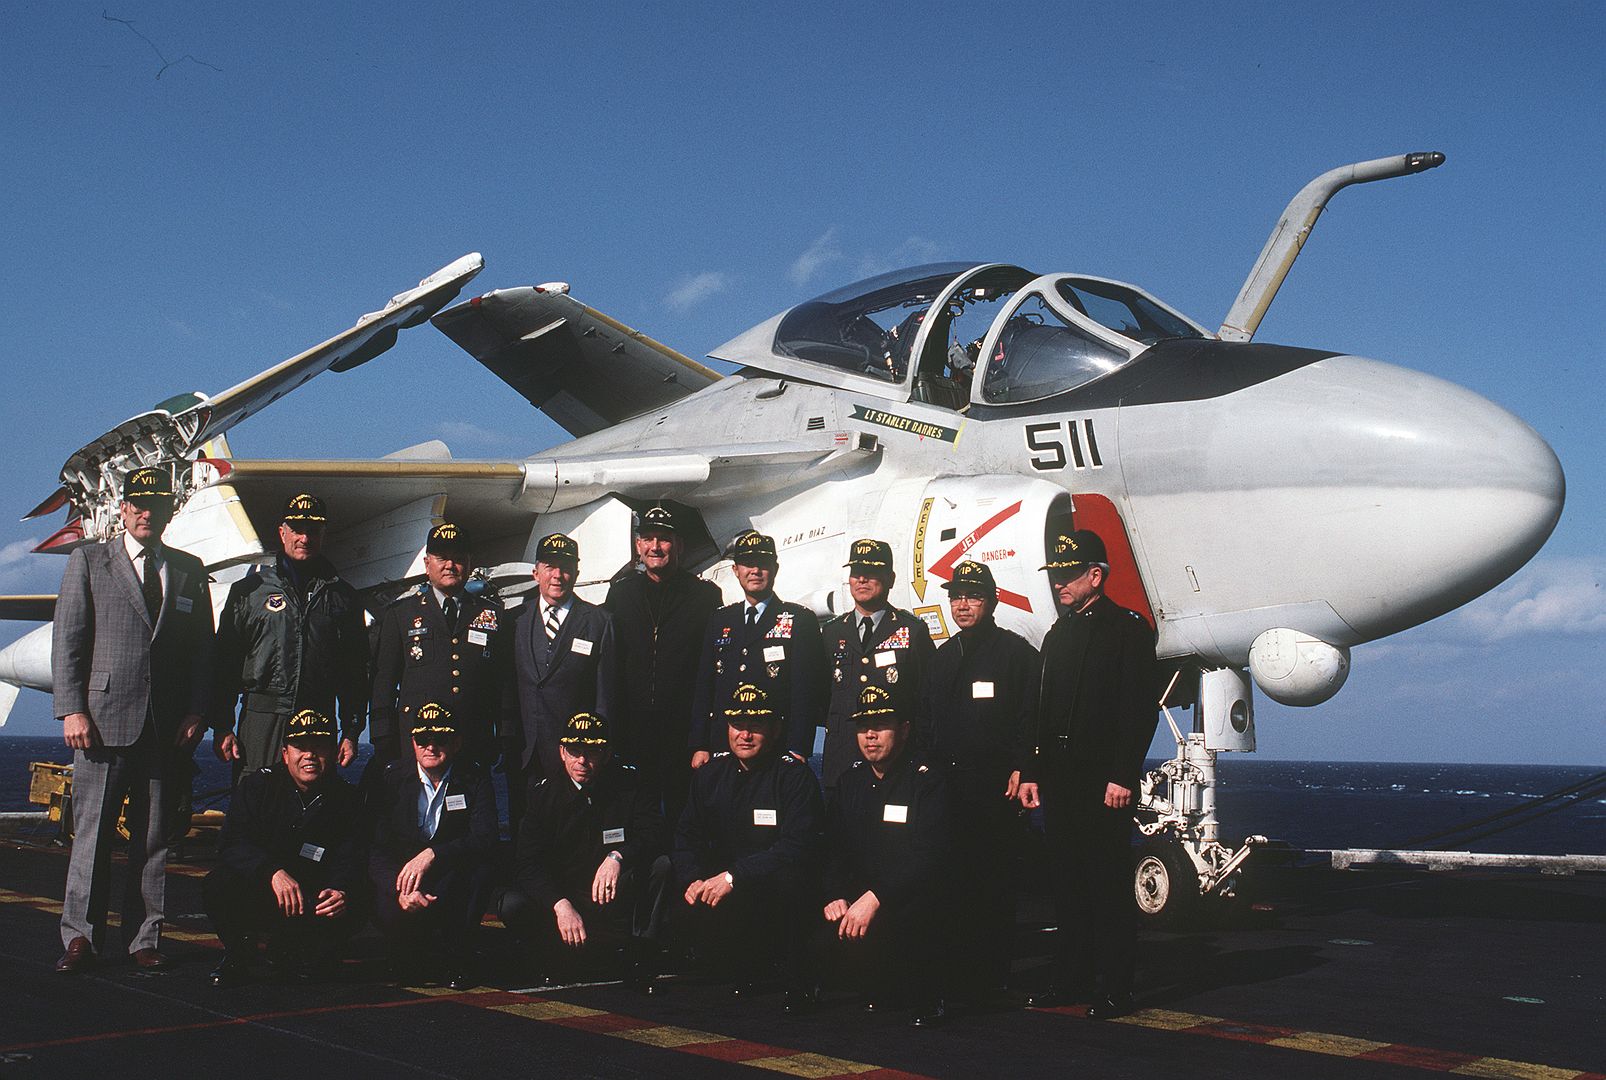 A 6E Intruder Aircraft With Distinguished Korean Military Personnel And Other VIPs Aboard The Aircraft Carrier USS MIDWAY